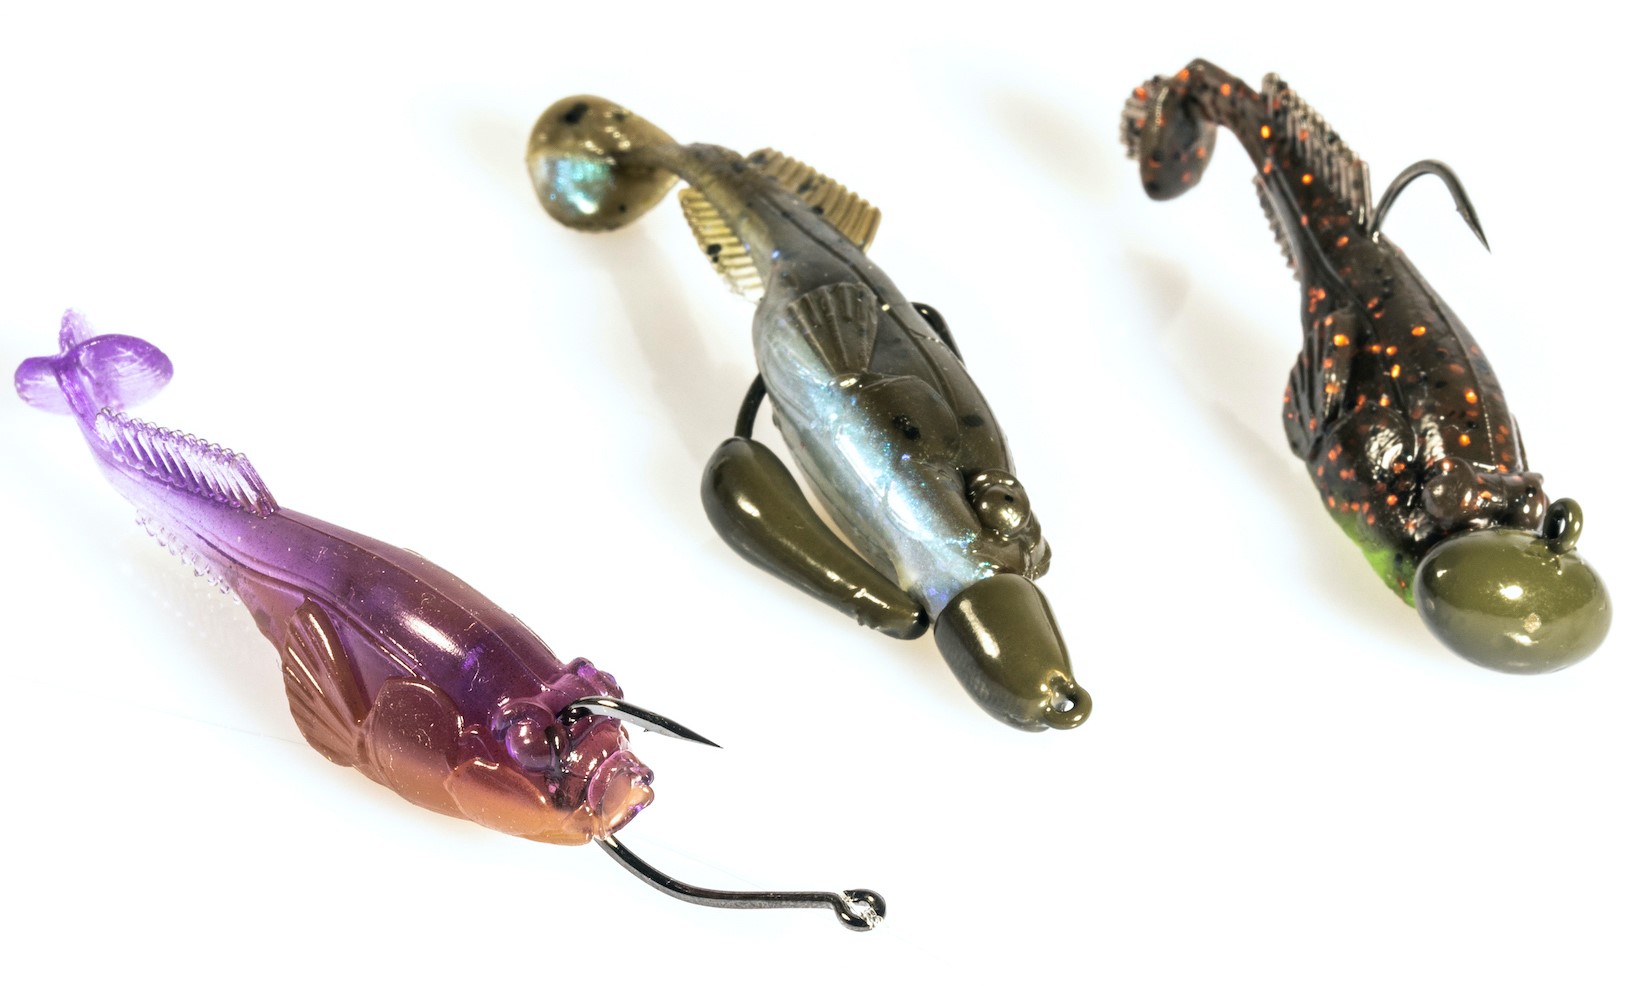 Z-Man Introduces New Goby Bait  The Ultimate Bass Fishing Resource Guide®  LLC